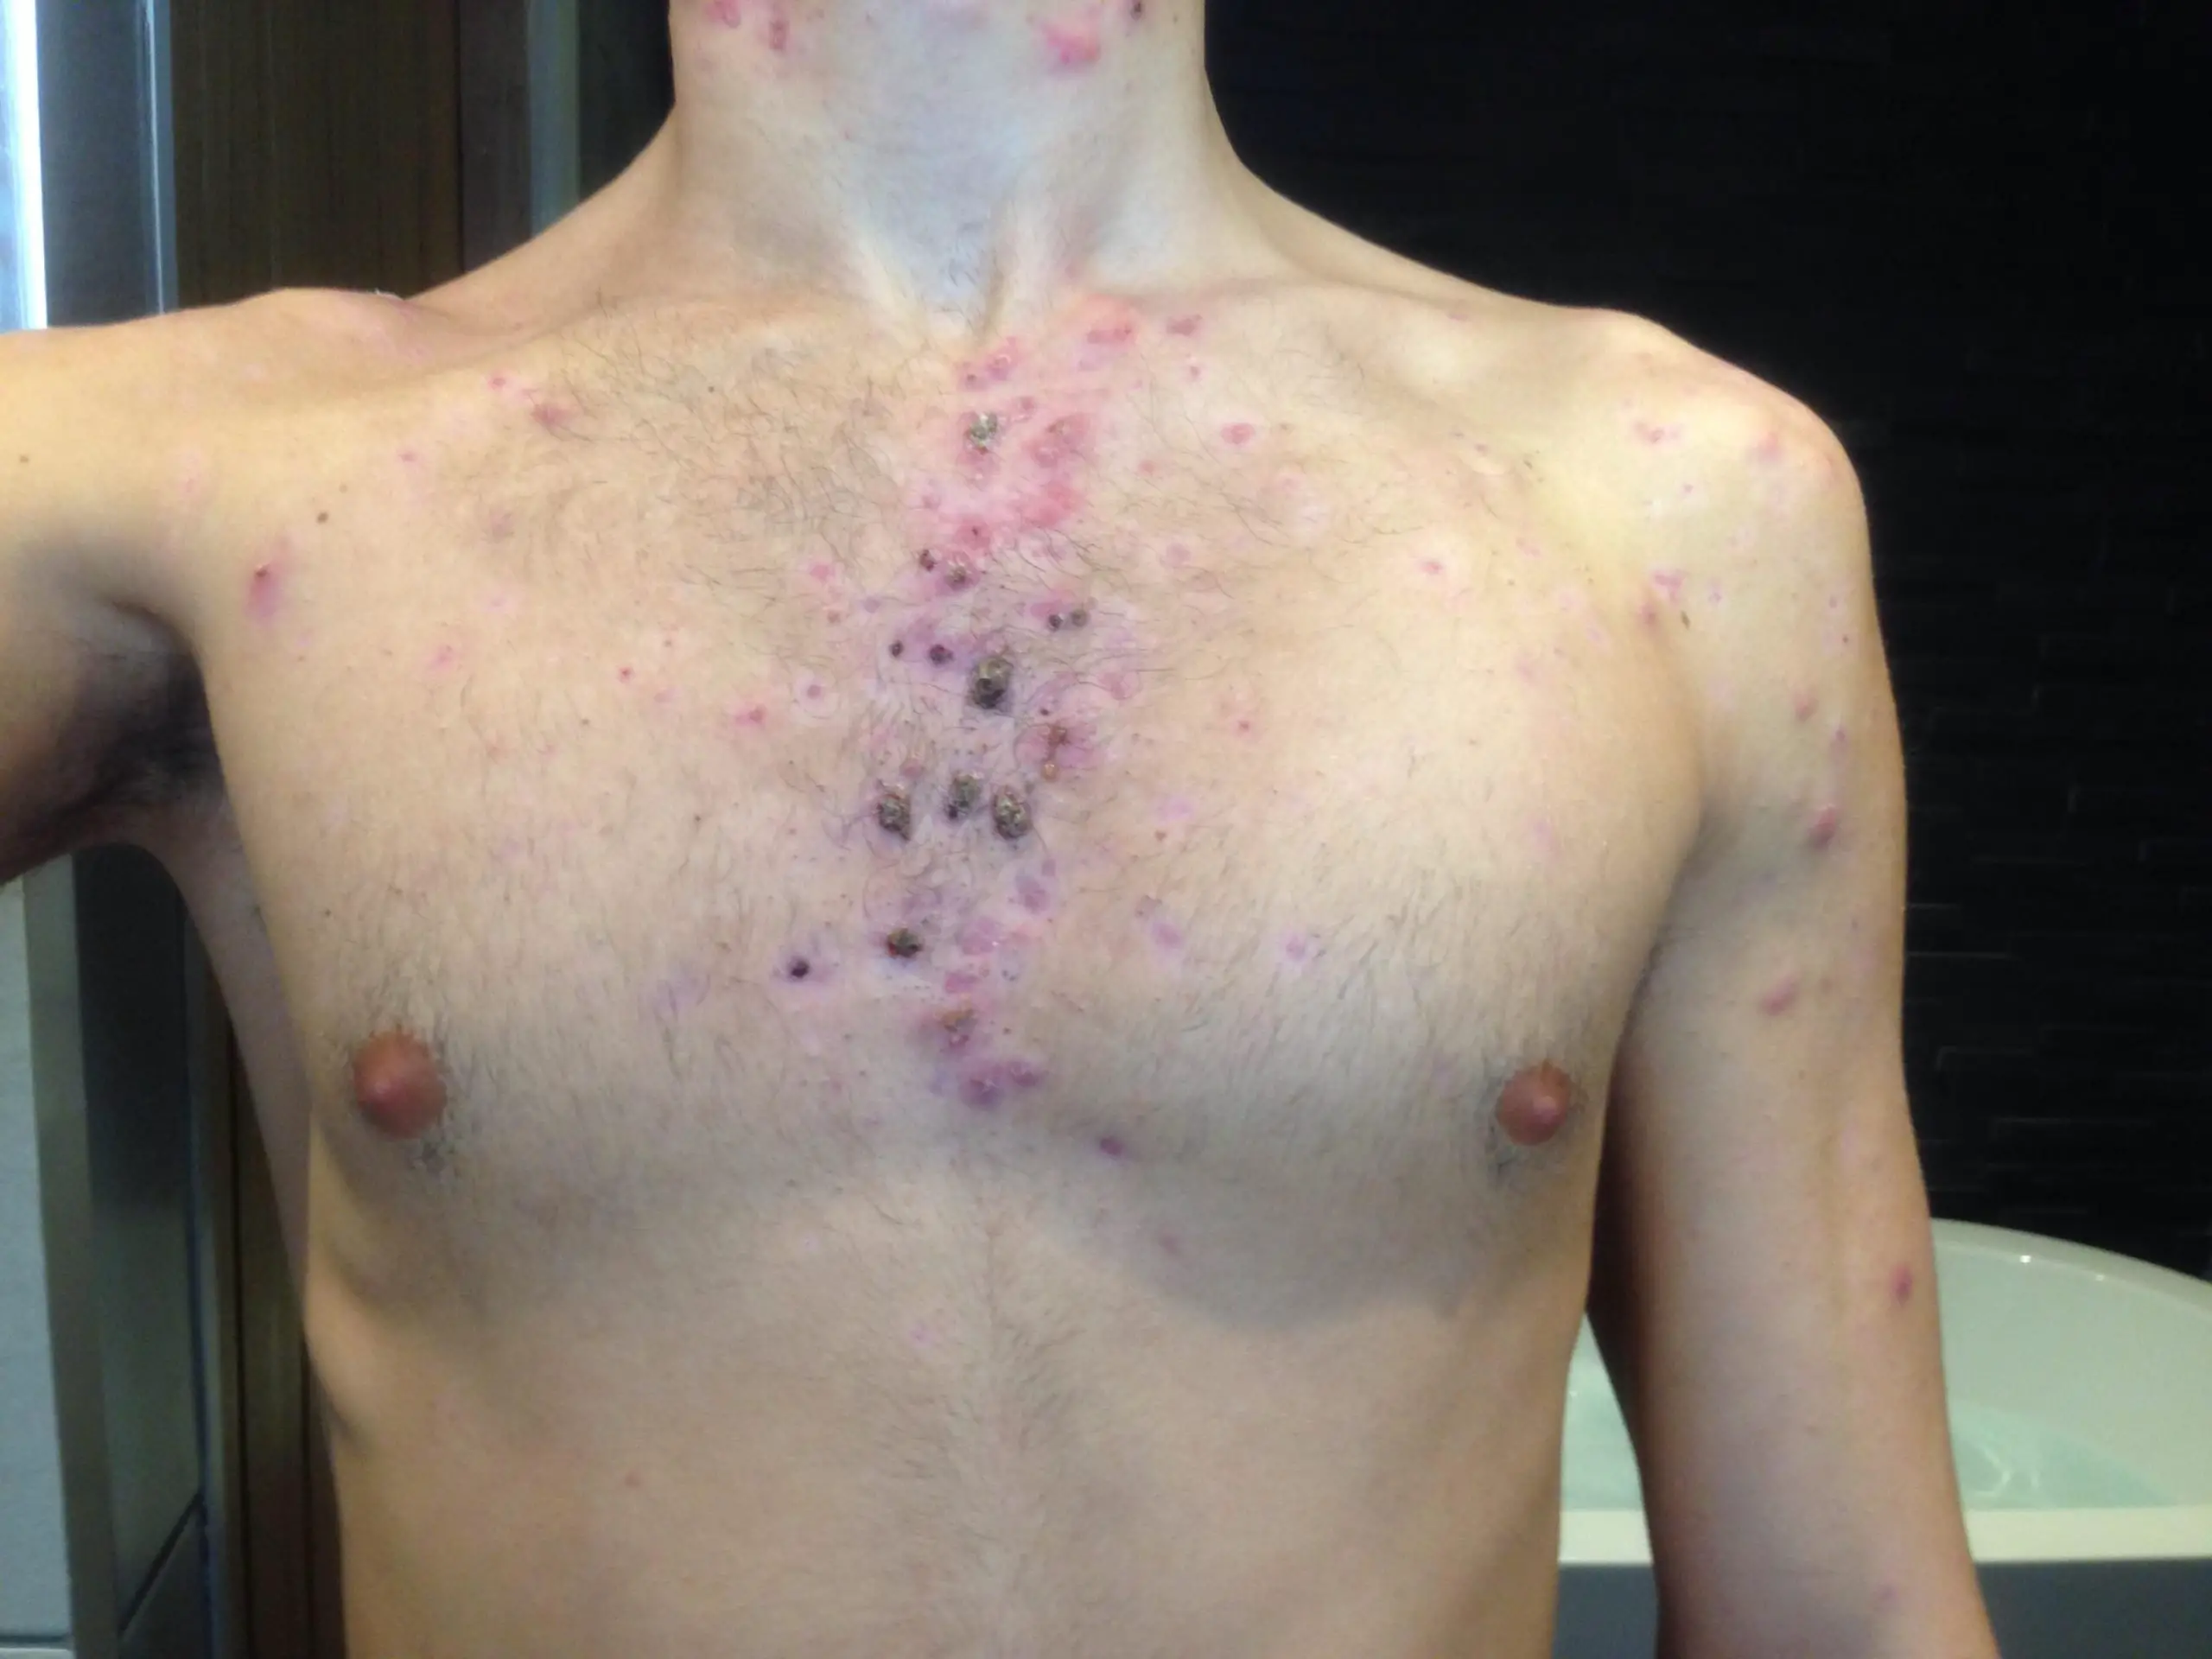 Chest, Neck And back cystic acne